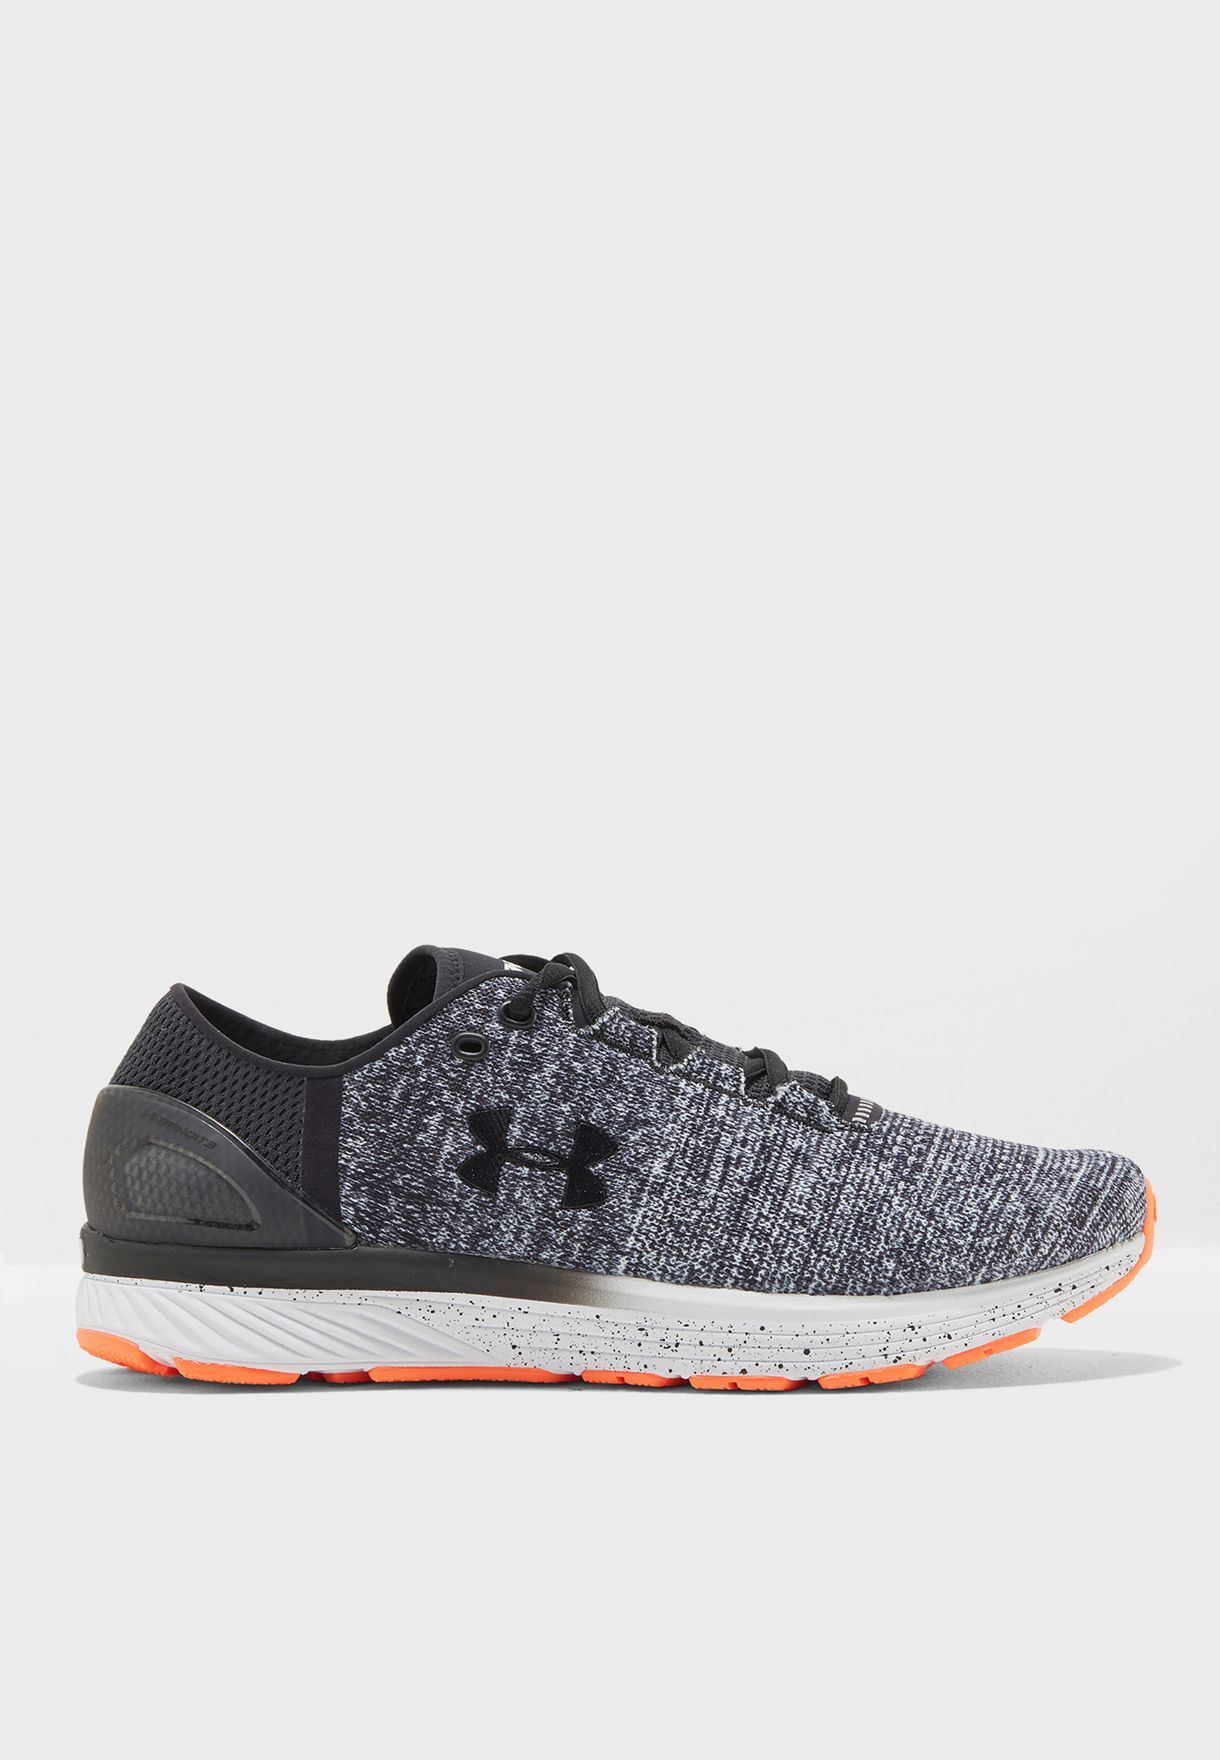 Buy Under Armour multicolor Charged Bandit 3 for Men Riyadh, Jeddah